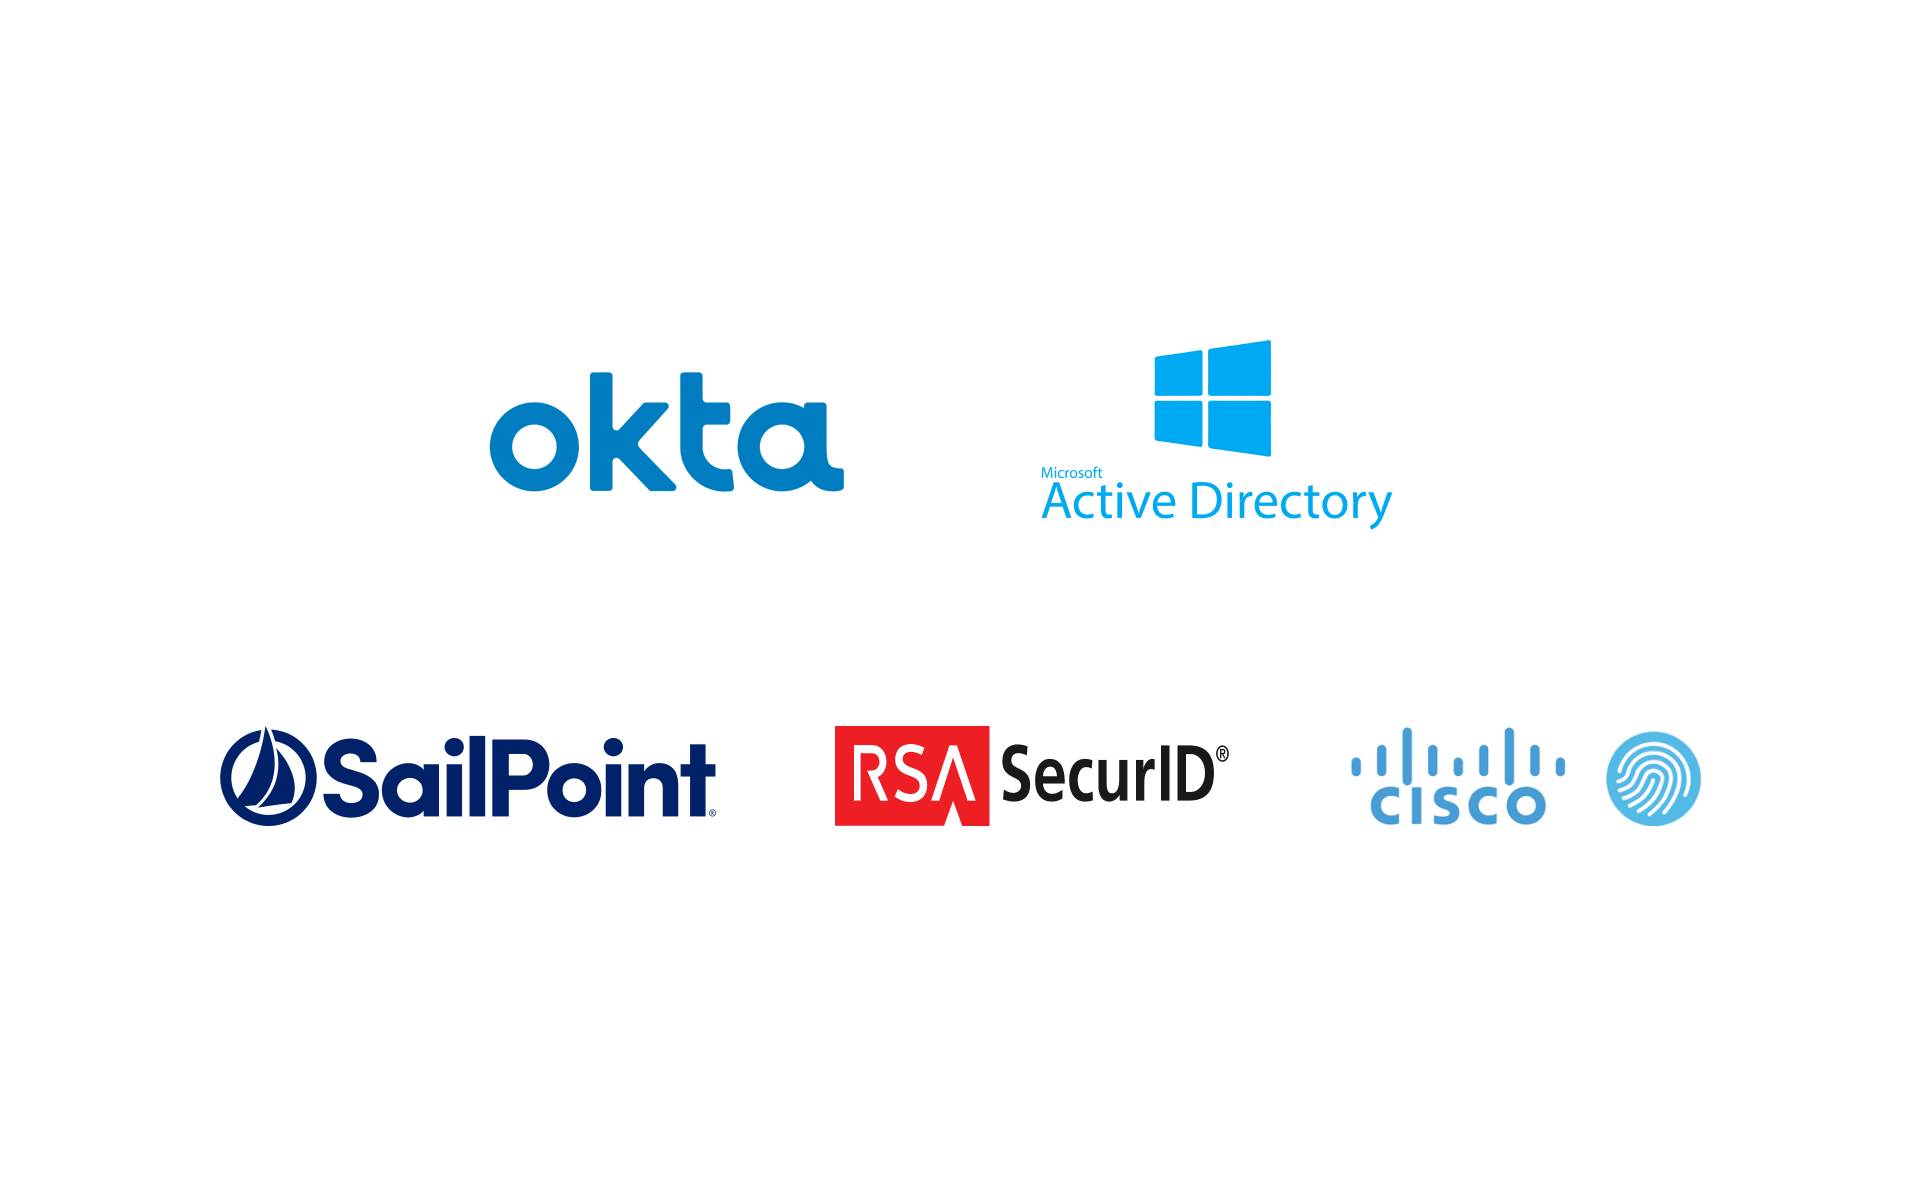 Image showing logos of services that Dispel integrates with: Okta, Active Directory, RSA SecurID, SailPoint, Cisco ISE